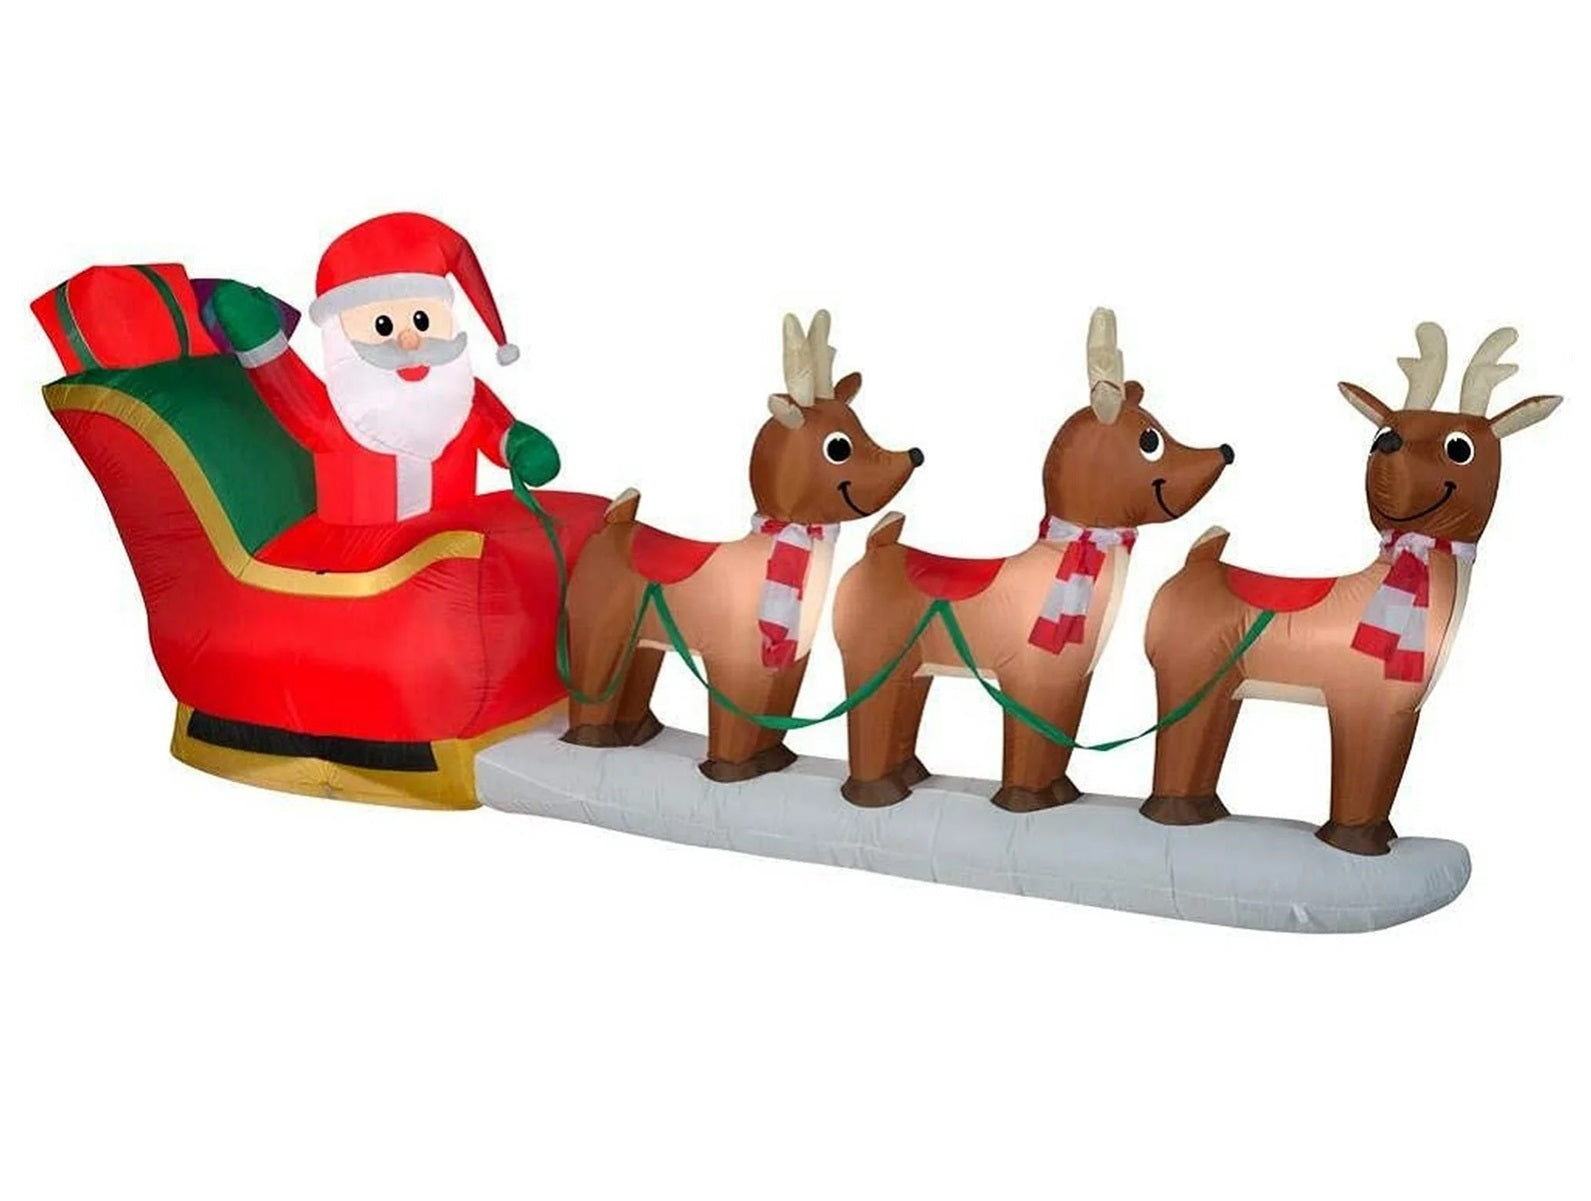 Home Accents Holiday 12F Giant-Sized LED Santa's Sleigh Scene Inflatable